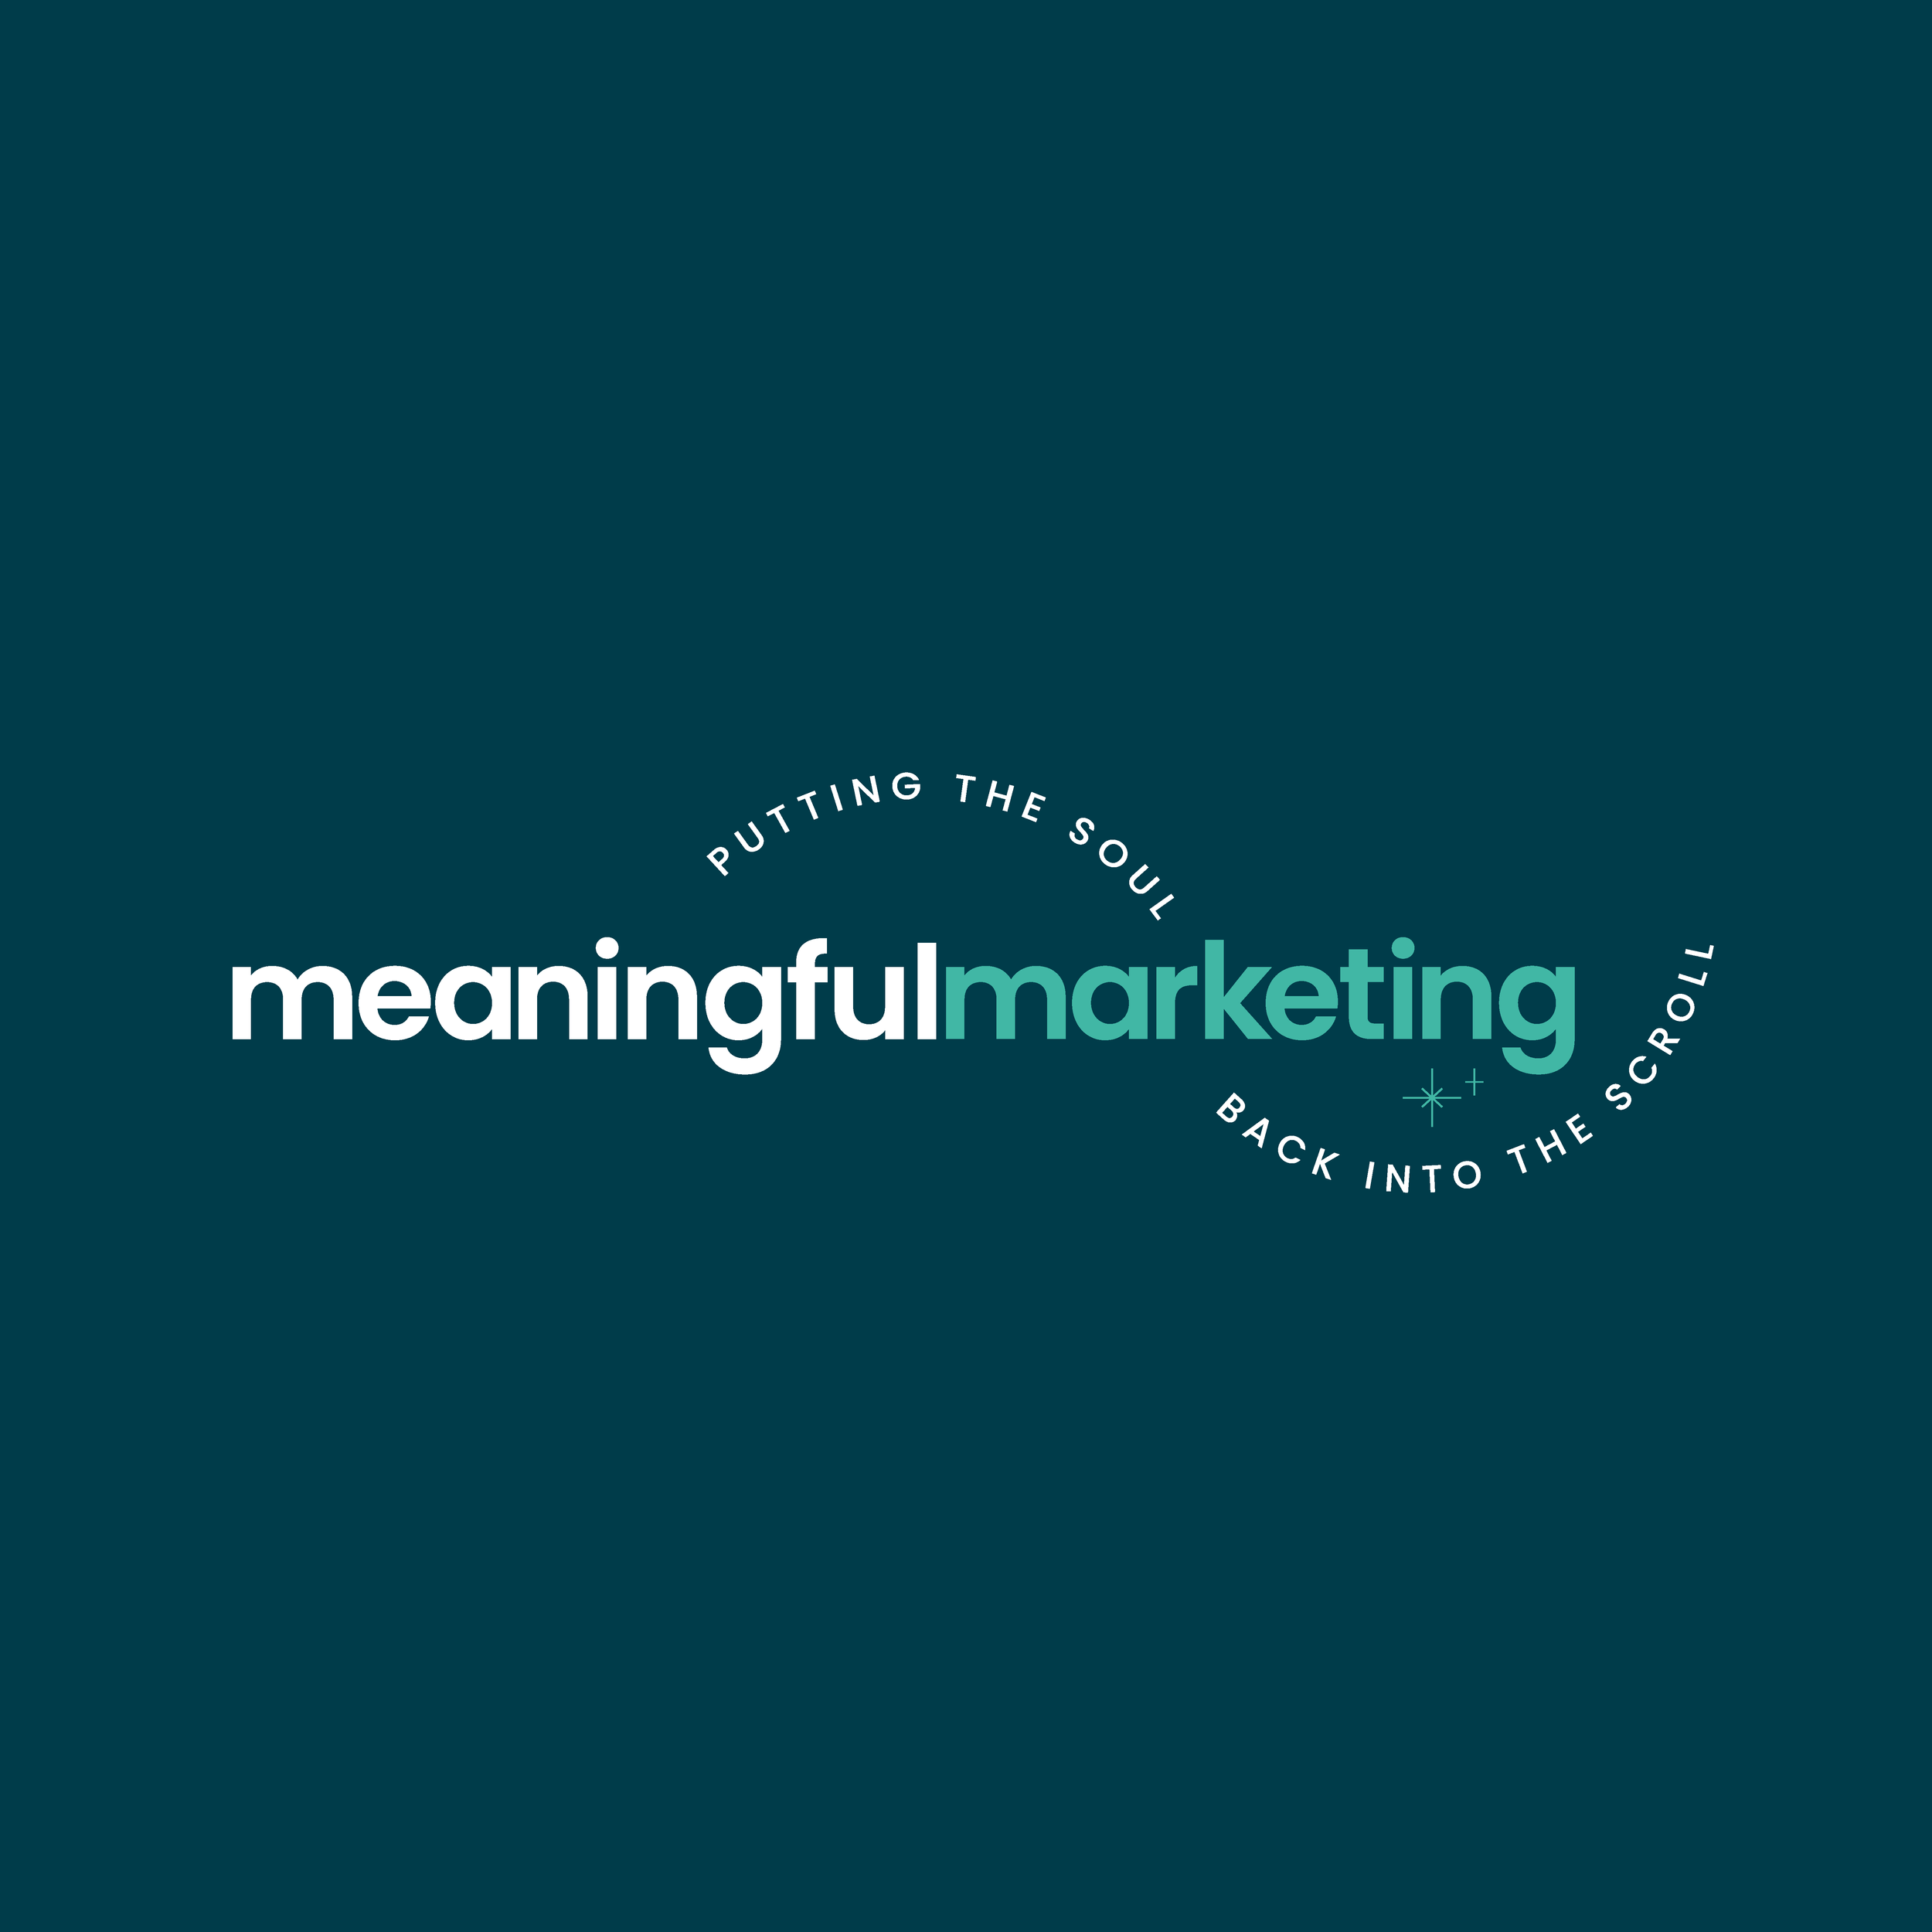 MeaningfulMarketing_Social Media Imagery_3.png